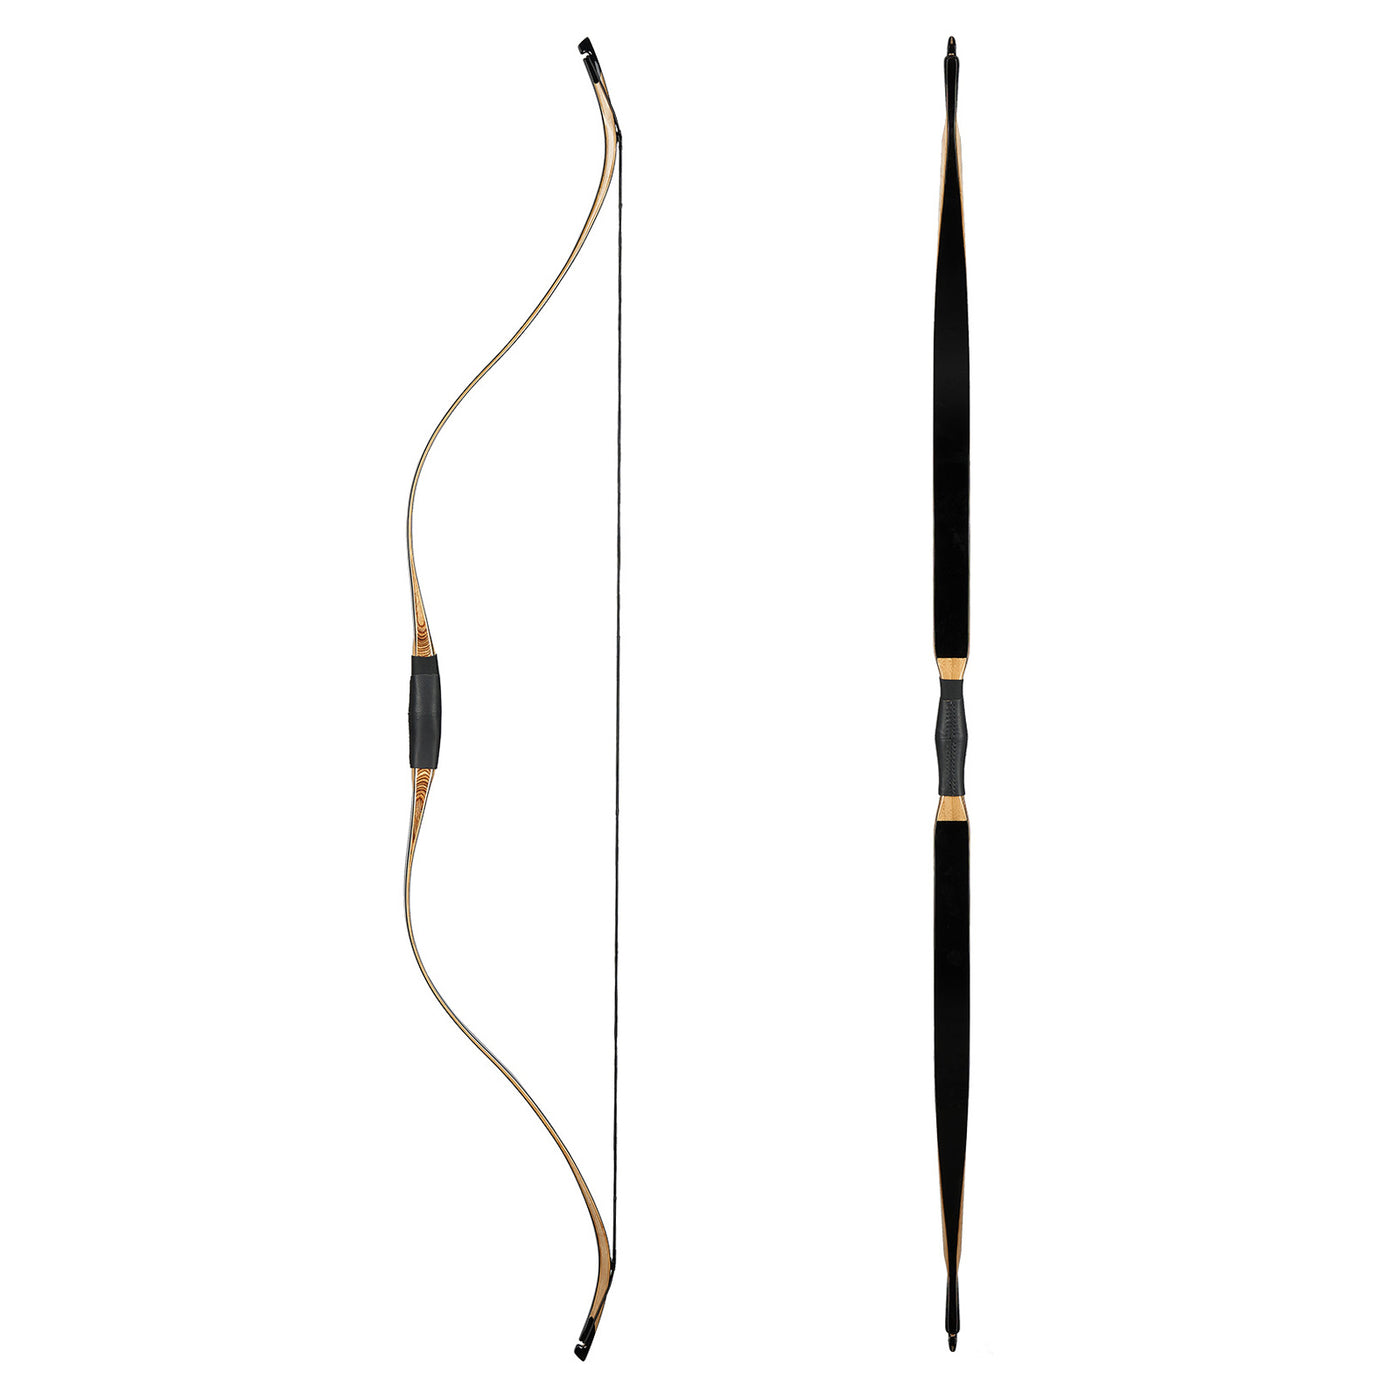 52" Ming Xiaoshao TopArchery Laminated Takedown Recurve Bow Traditional Archery For Hunting Target Practice